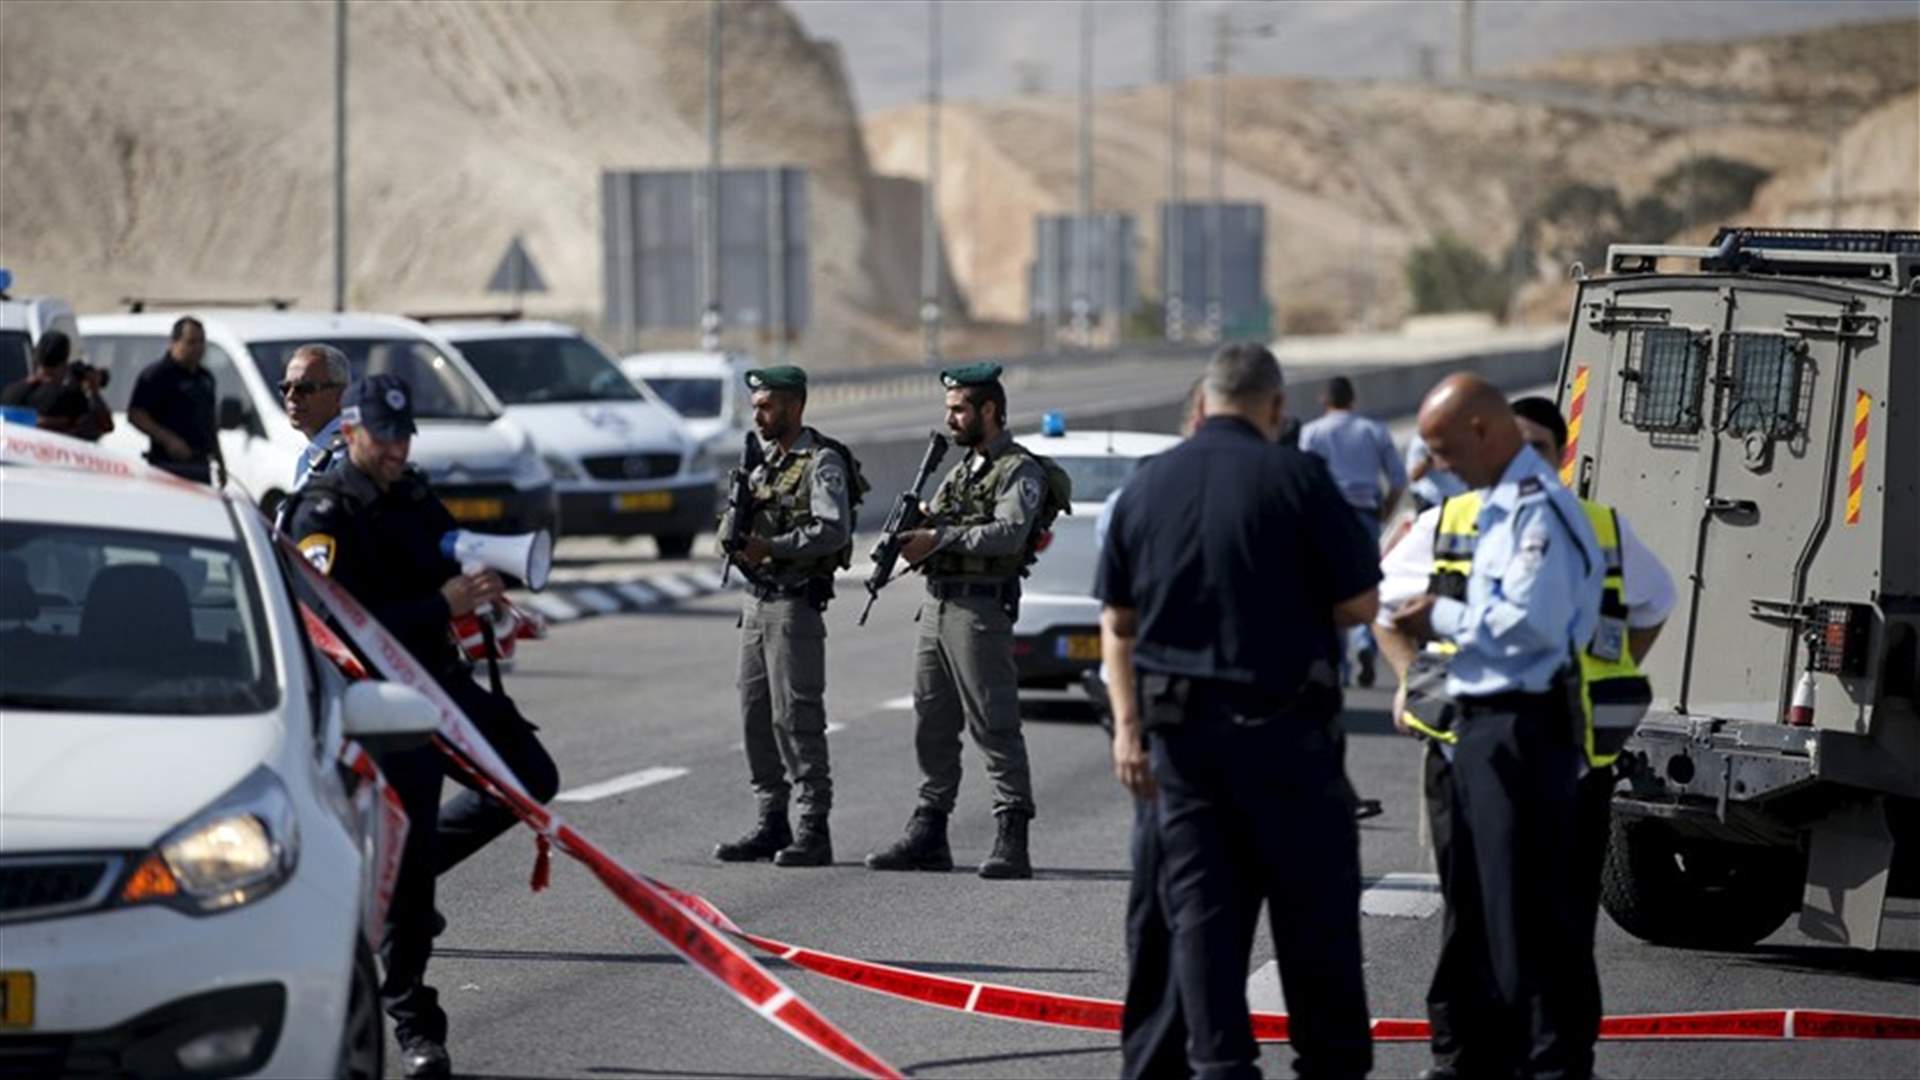 Palestinians attack Israeli cars in W. Bank, assailant shot dead -army